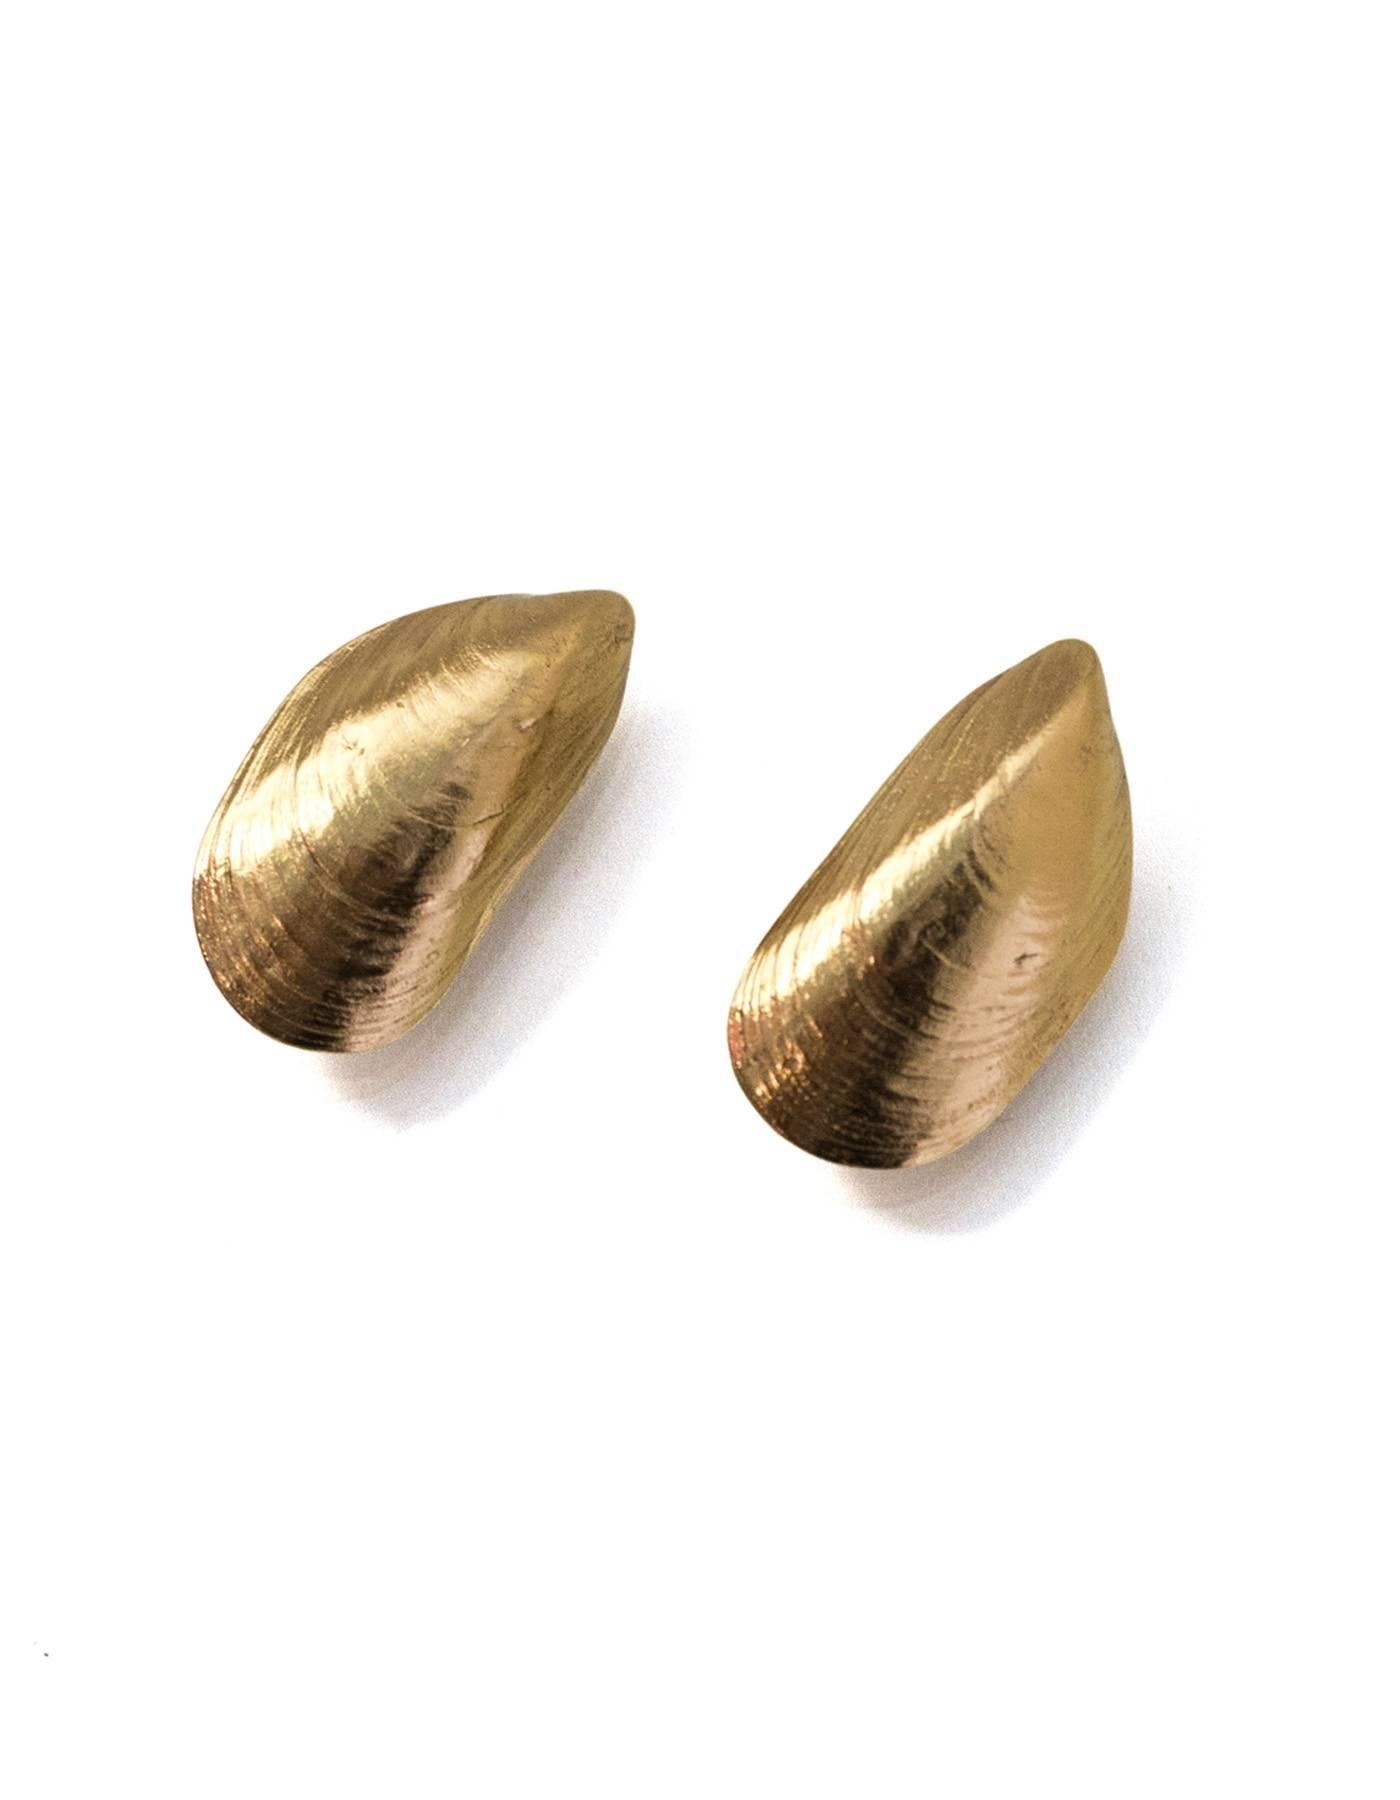 Goossen's Goldtone Mussel Shell Clip-On Earrings

Color: Goldtone
Materials: Metal
Closure: Clip-On
Overall Condition: Excellent pre-owned condition with light surface marks

Measurements:
Length: 1.5